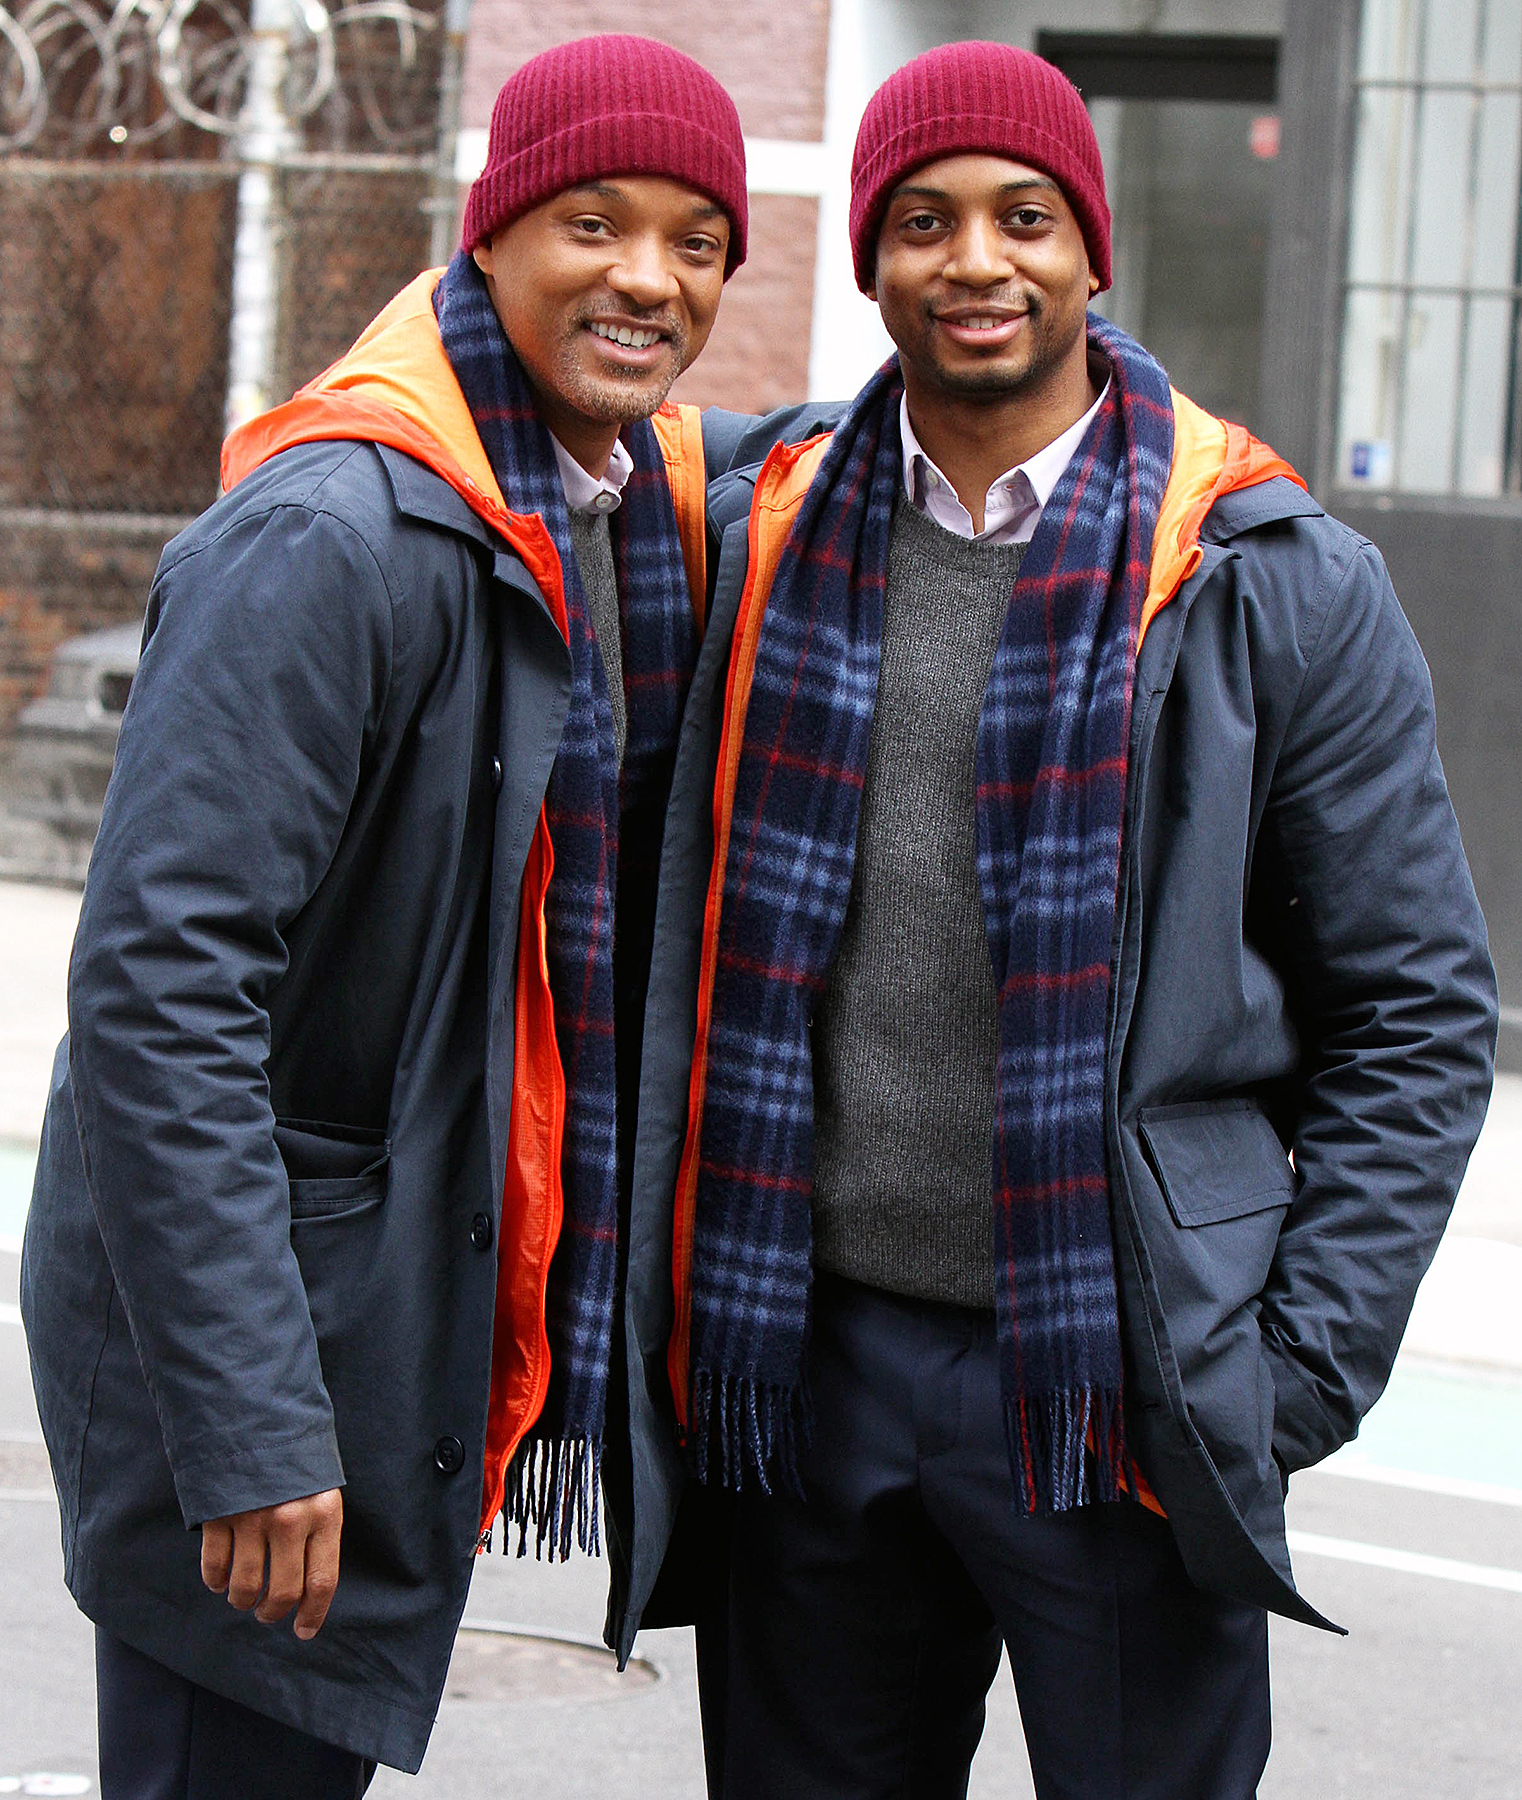 Will Smith stunt double Collateral Beauty